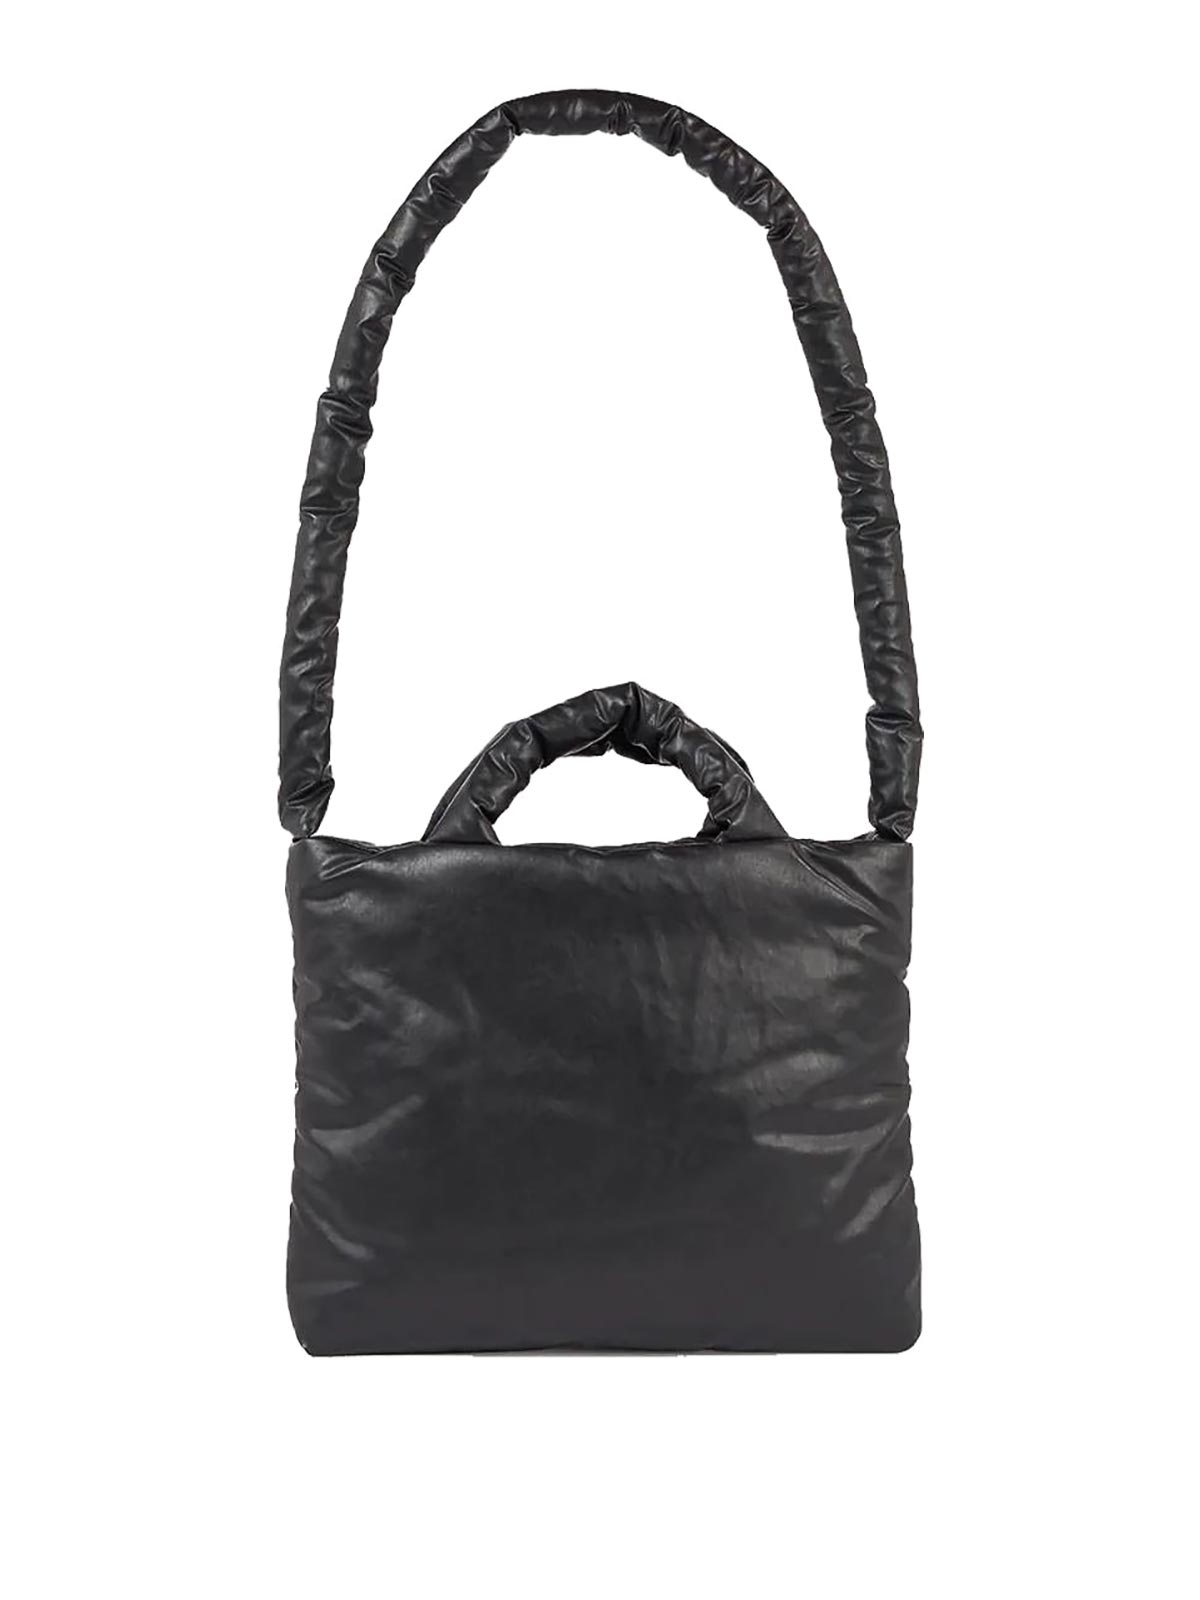 Kassl Editions Kassl Leather Lacquer Bag In Black